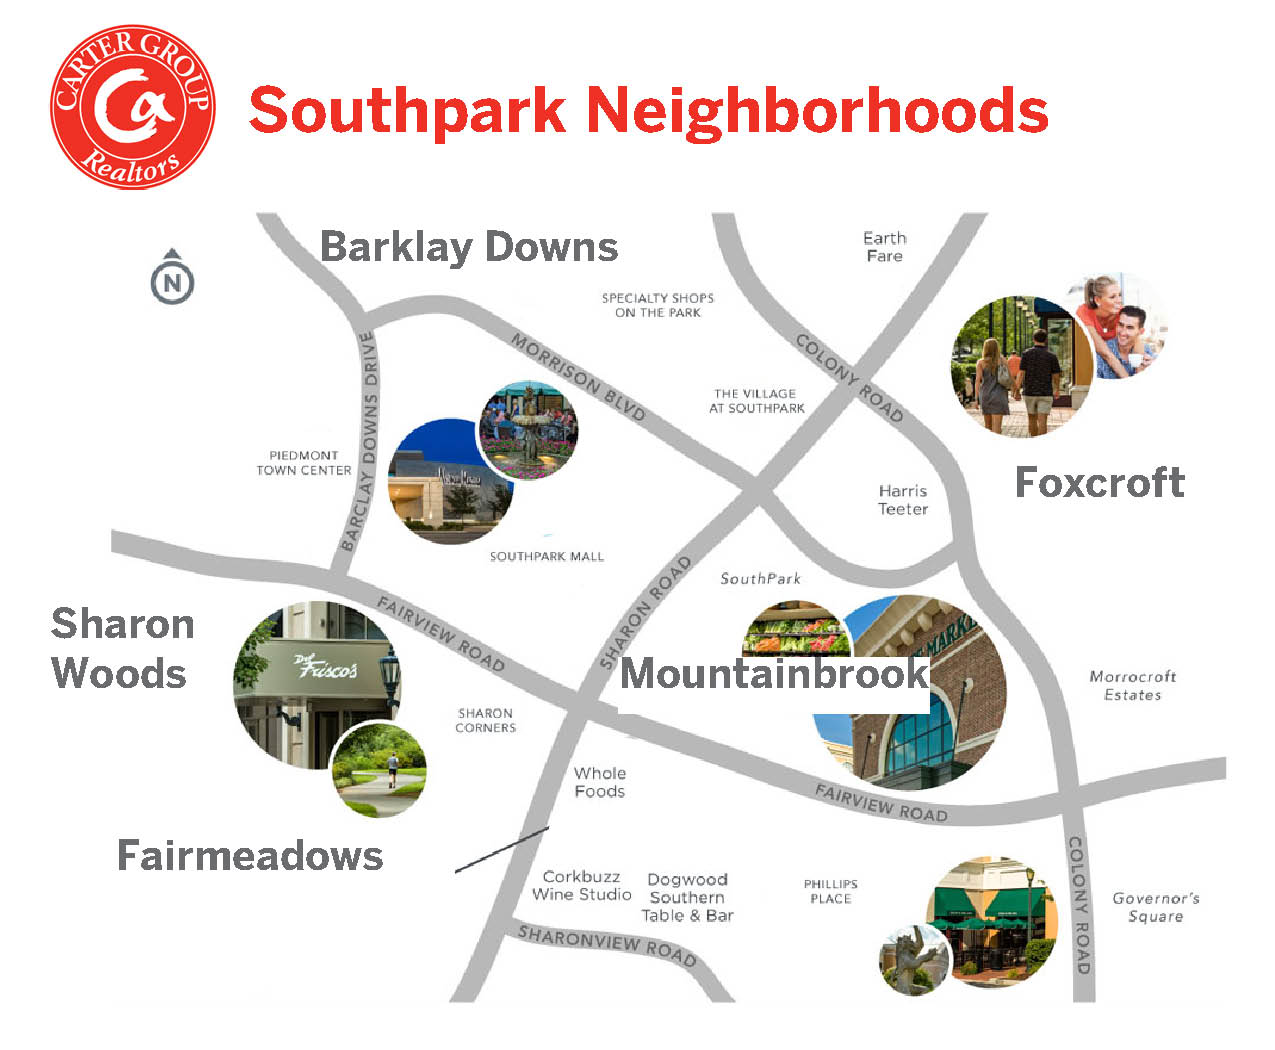 Getting to Know Charlotte's SouthPark Neighborhood